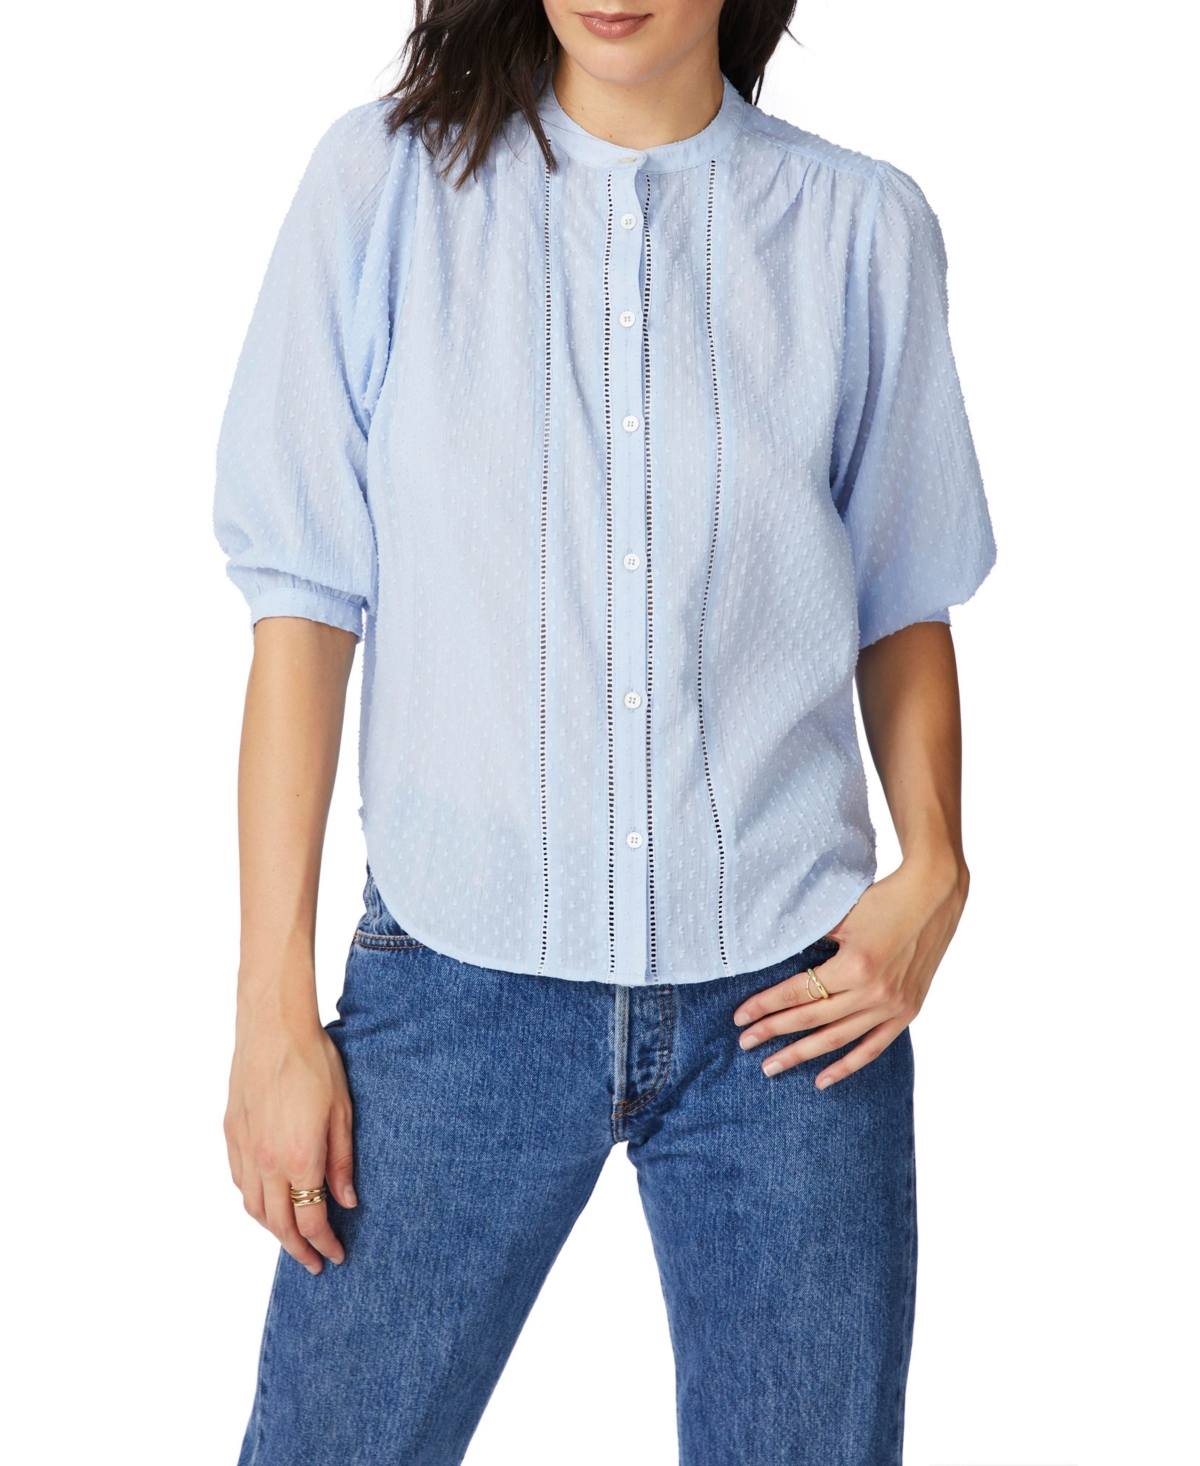 Women's 3/4 Sleeve Crinkle Clip Button Front Blouse - Chambray Blue